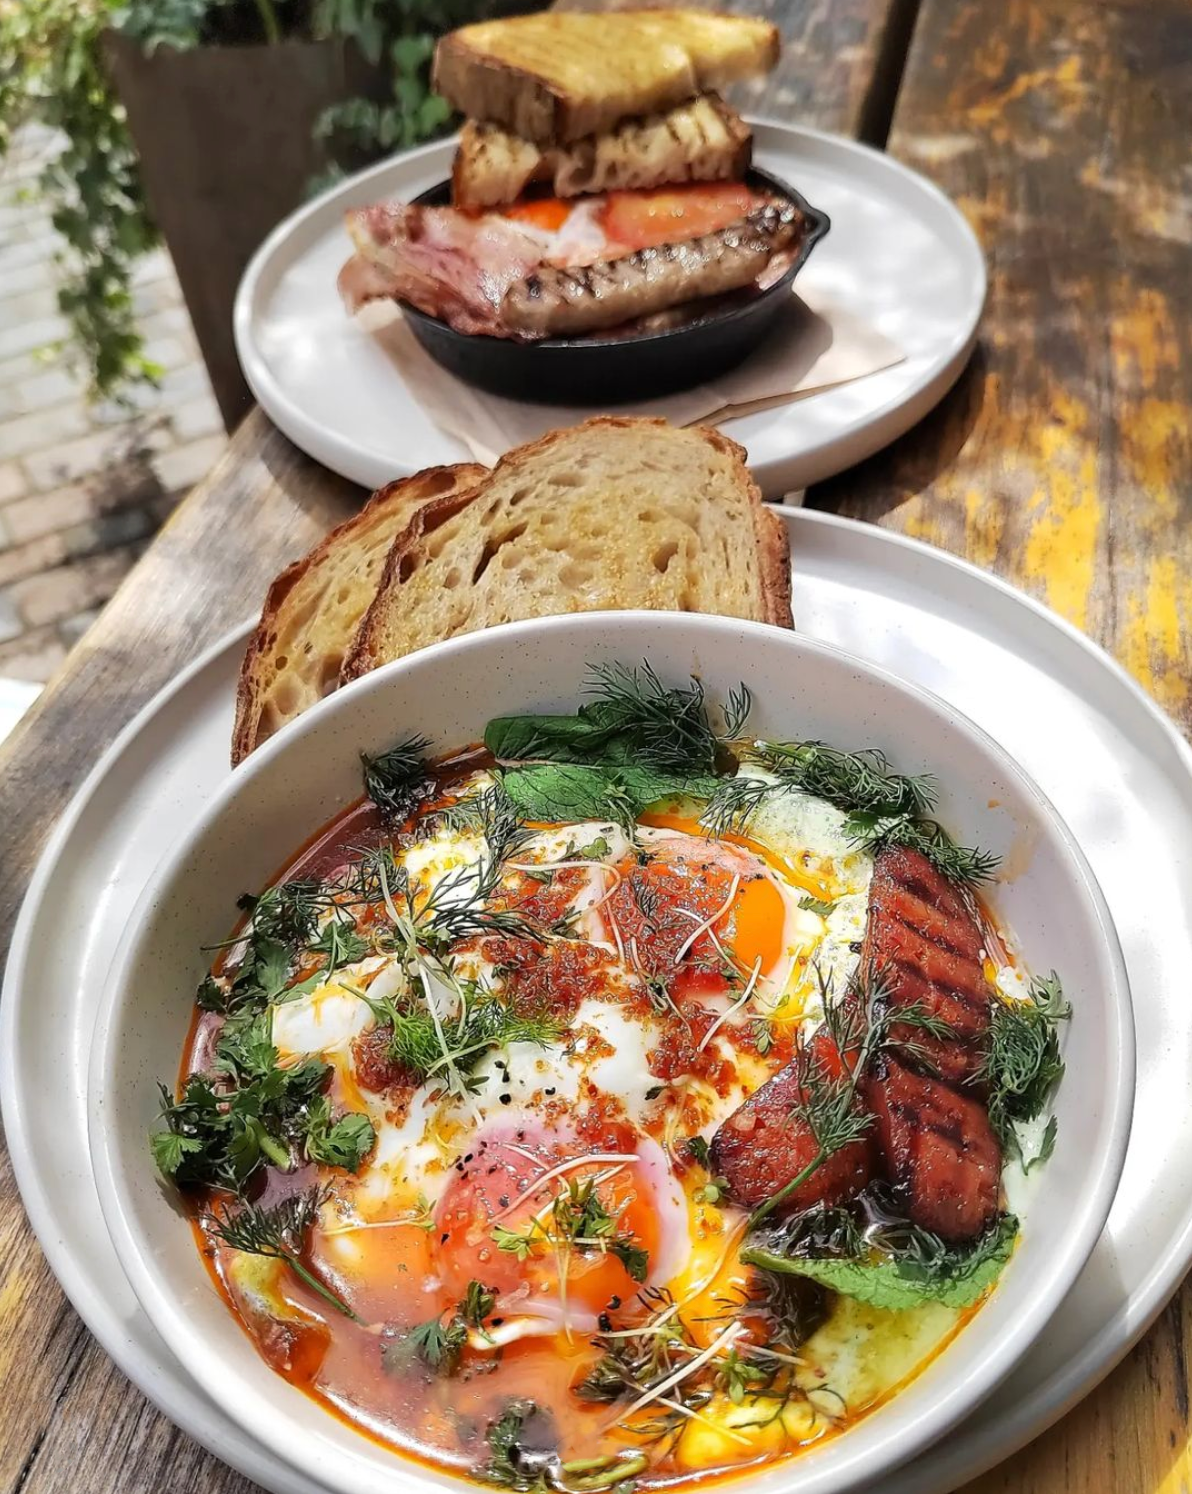 The best coffee shops in London | Brunch at Lomond, including smashed avocado on toast, and shakshuka